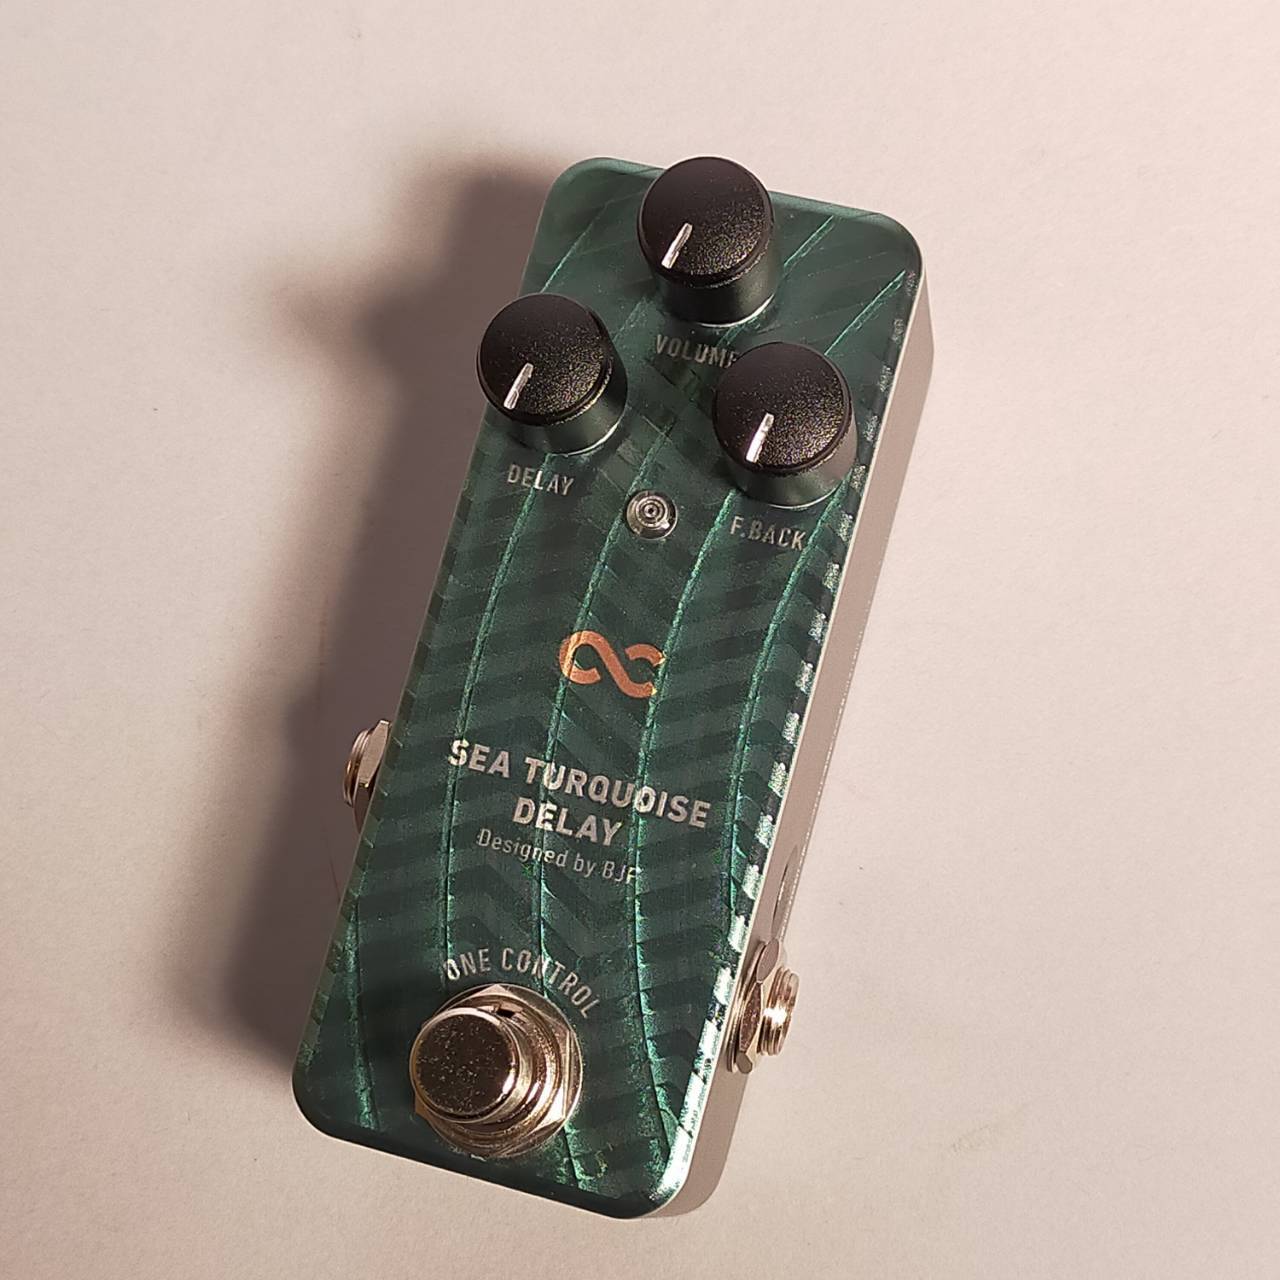 ONE CONTROL SEA TURQUOISE DELAY コンパクトエフェクター ディレイ